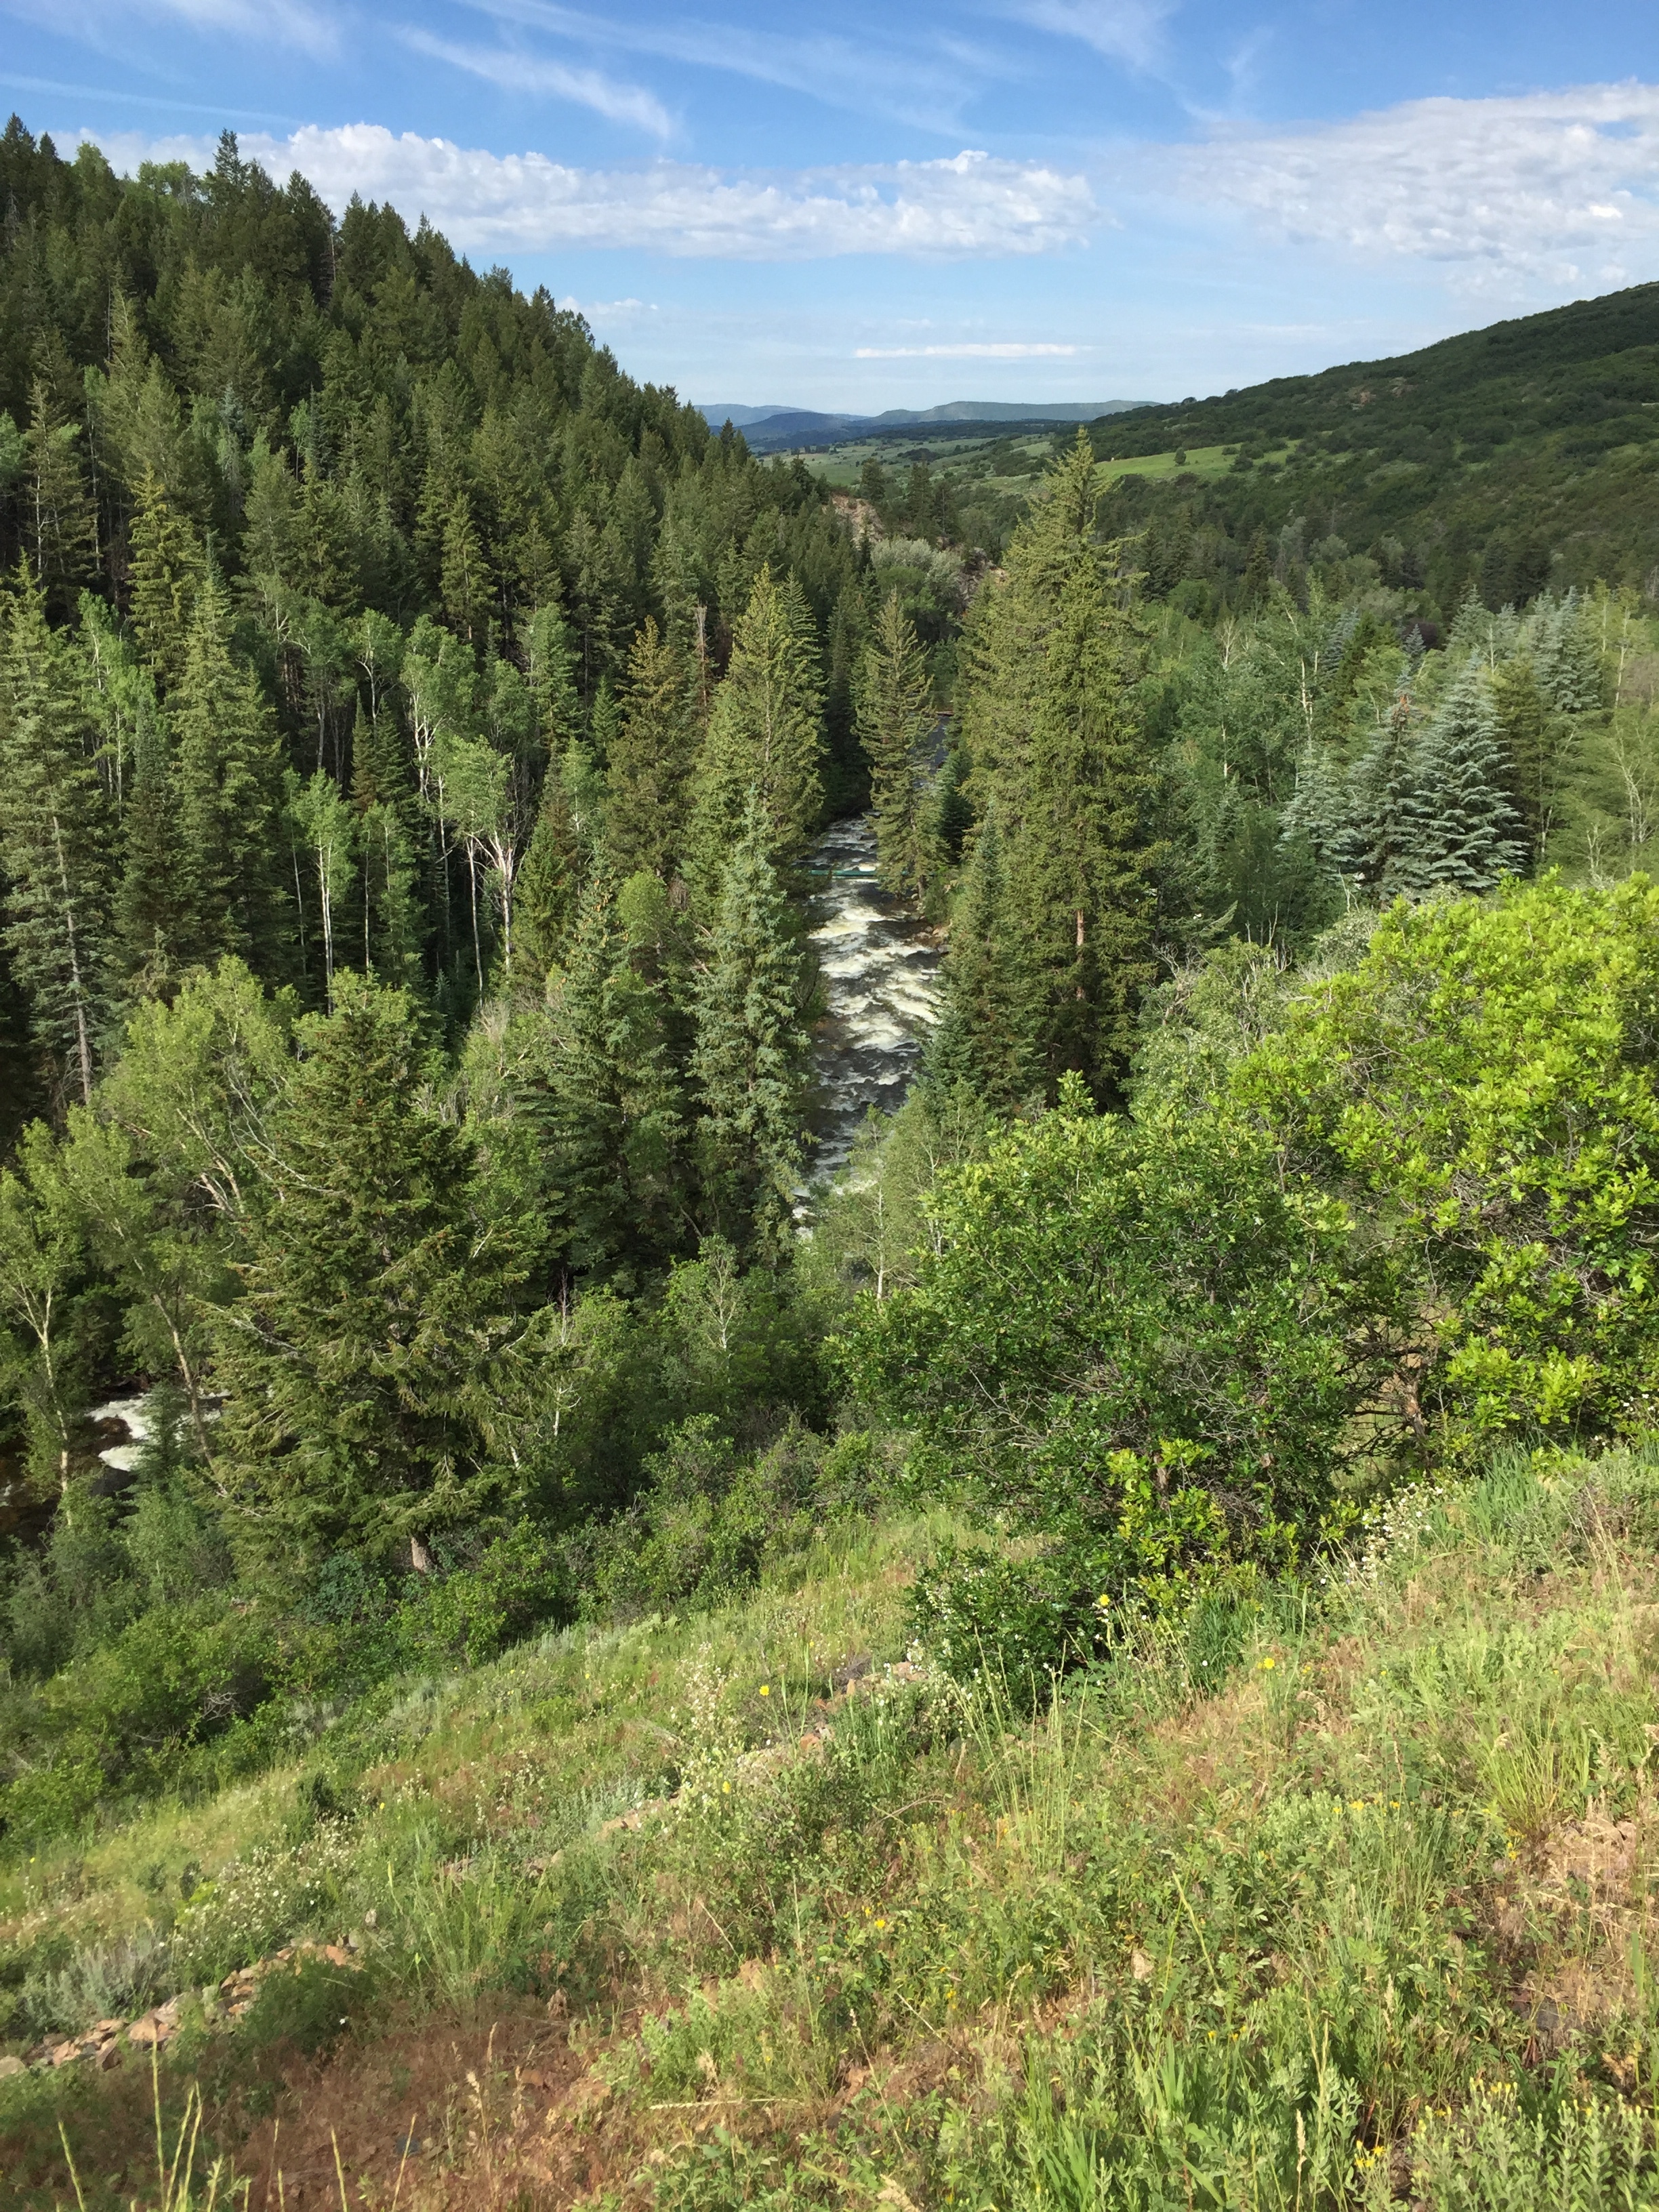 Mad Creek immediately below the trail and Yampa Valley in the distance.